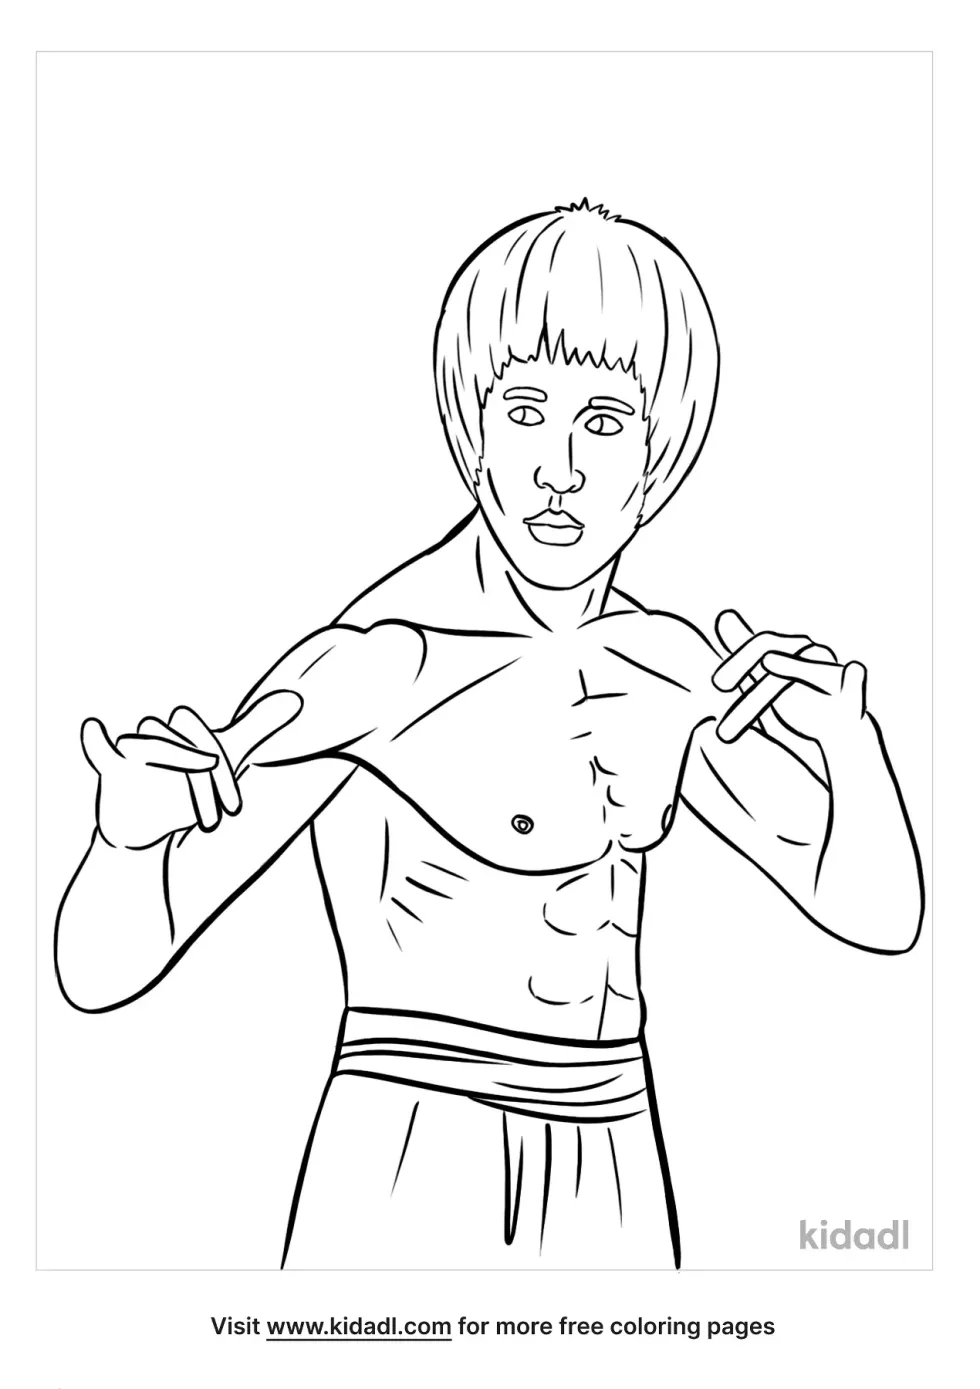 Bruce Lee Coloring Page